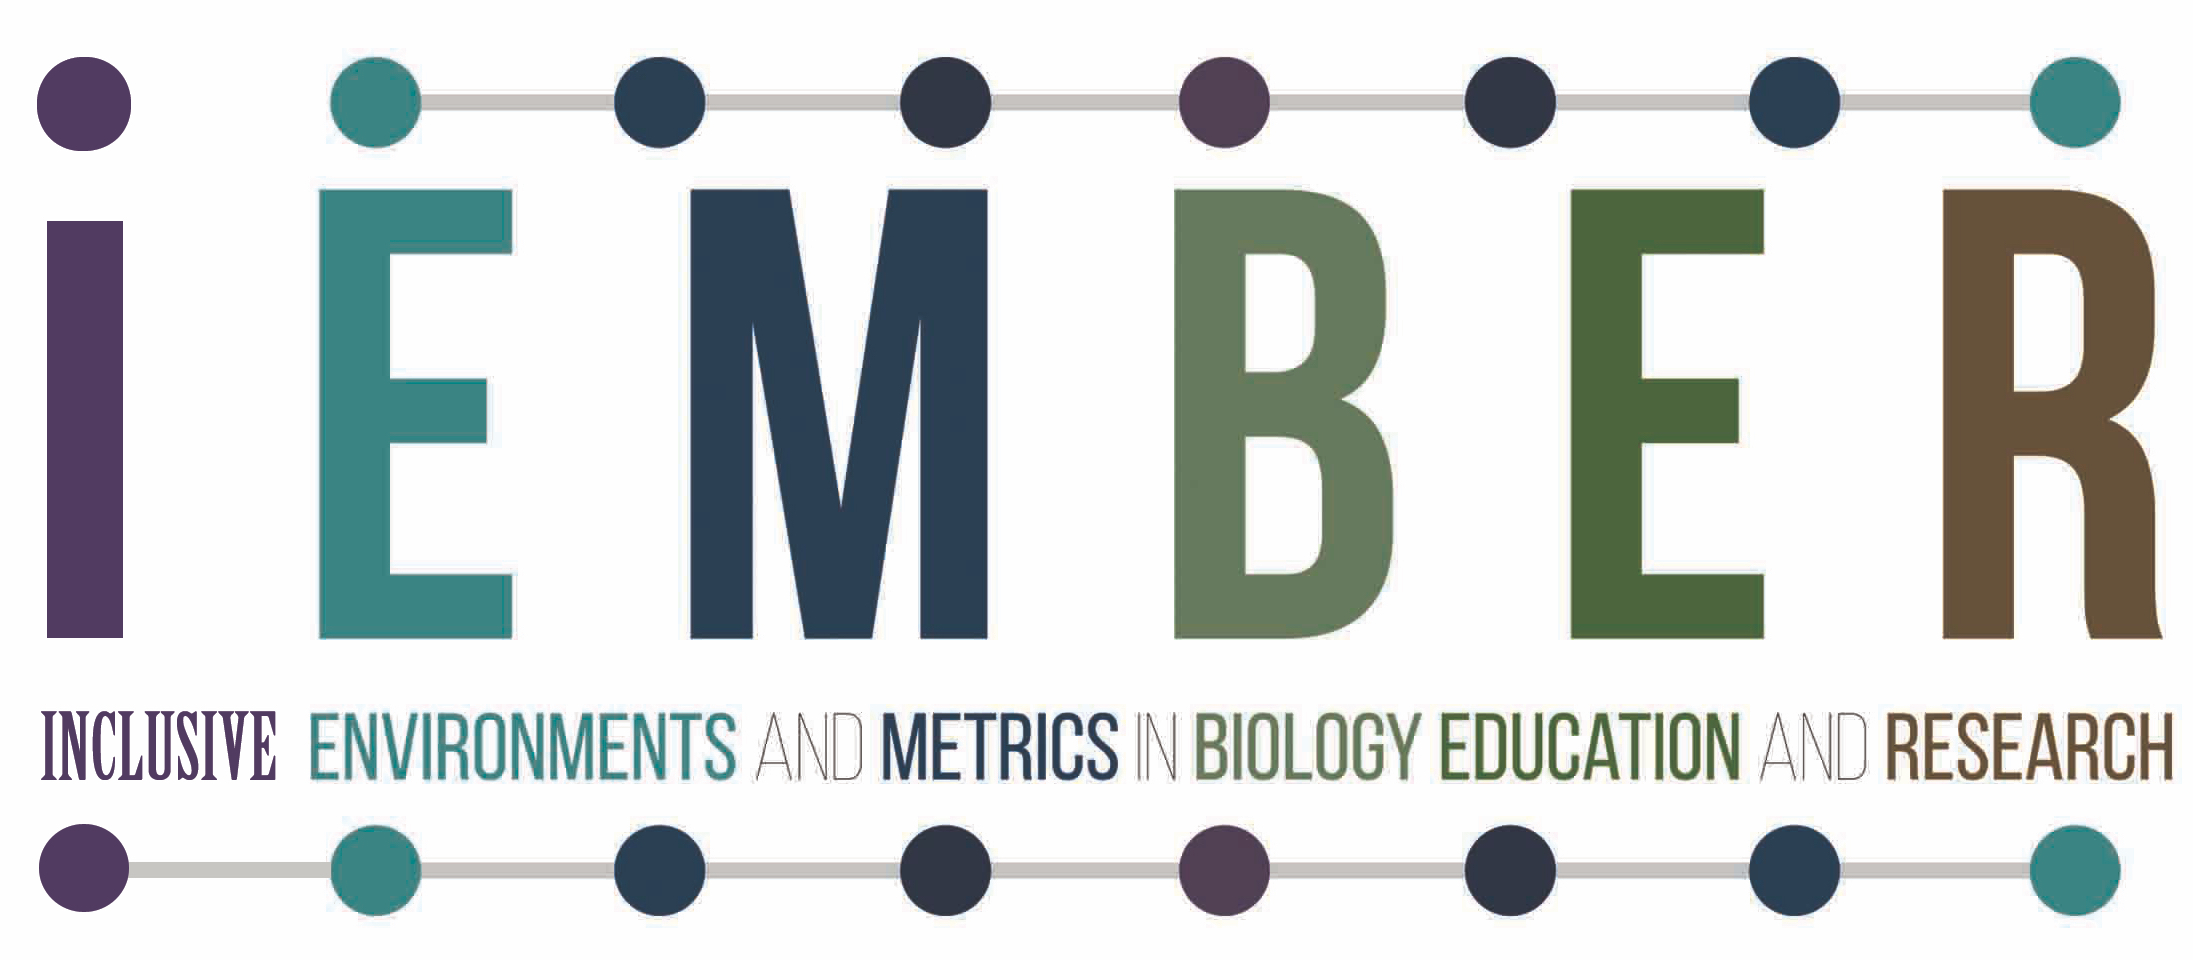 Inclusive Environments and Metrics in Biology Education and Research (iEMBER) group image